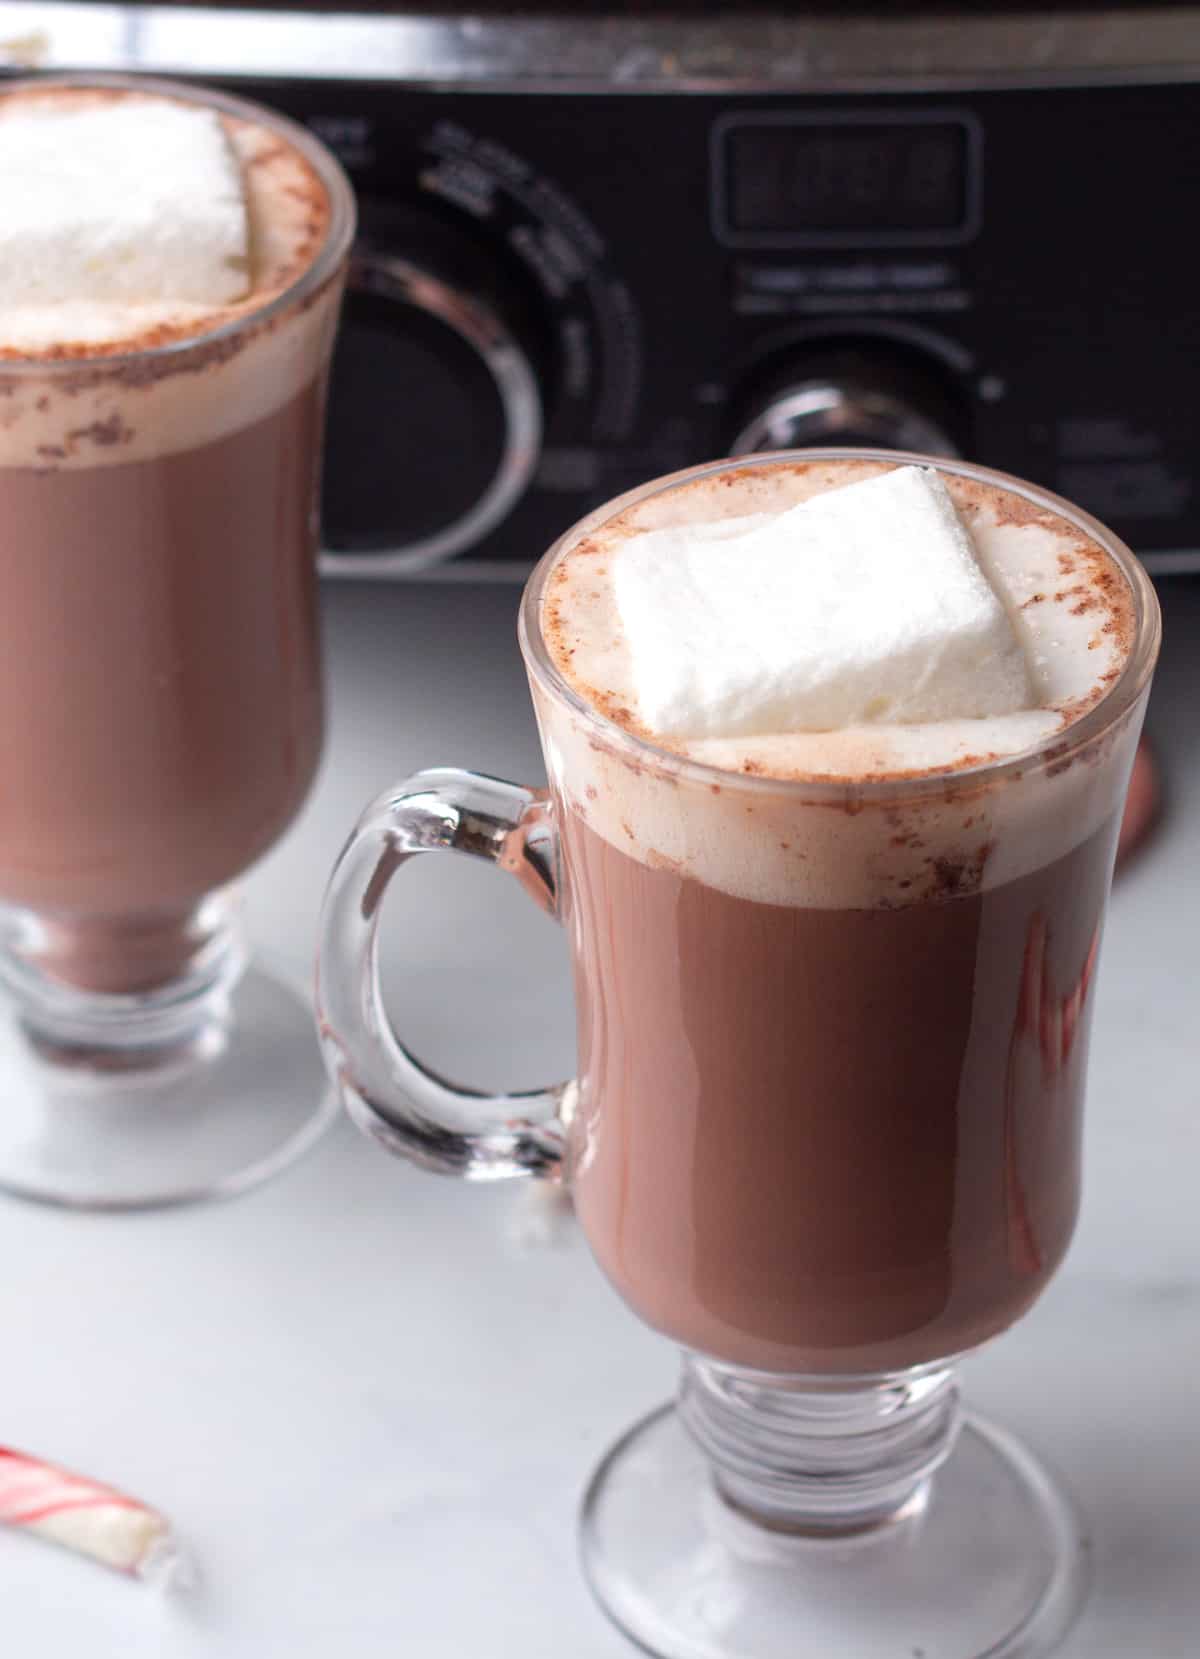 Two glasses of hot chocolate with marshmallows on top.